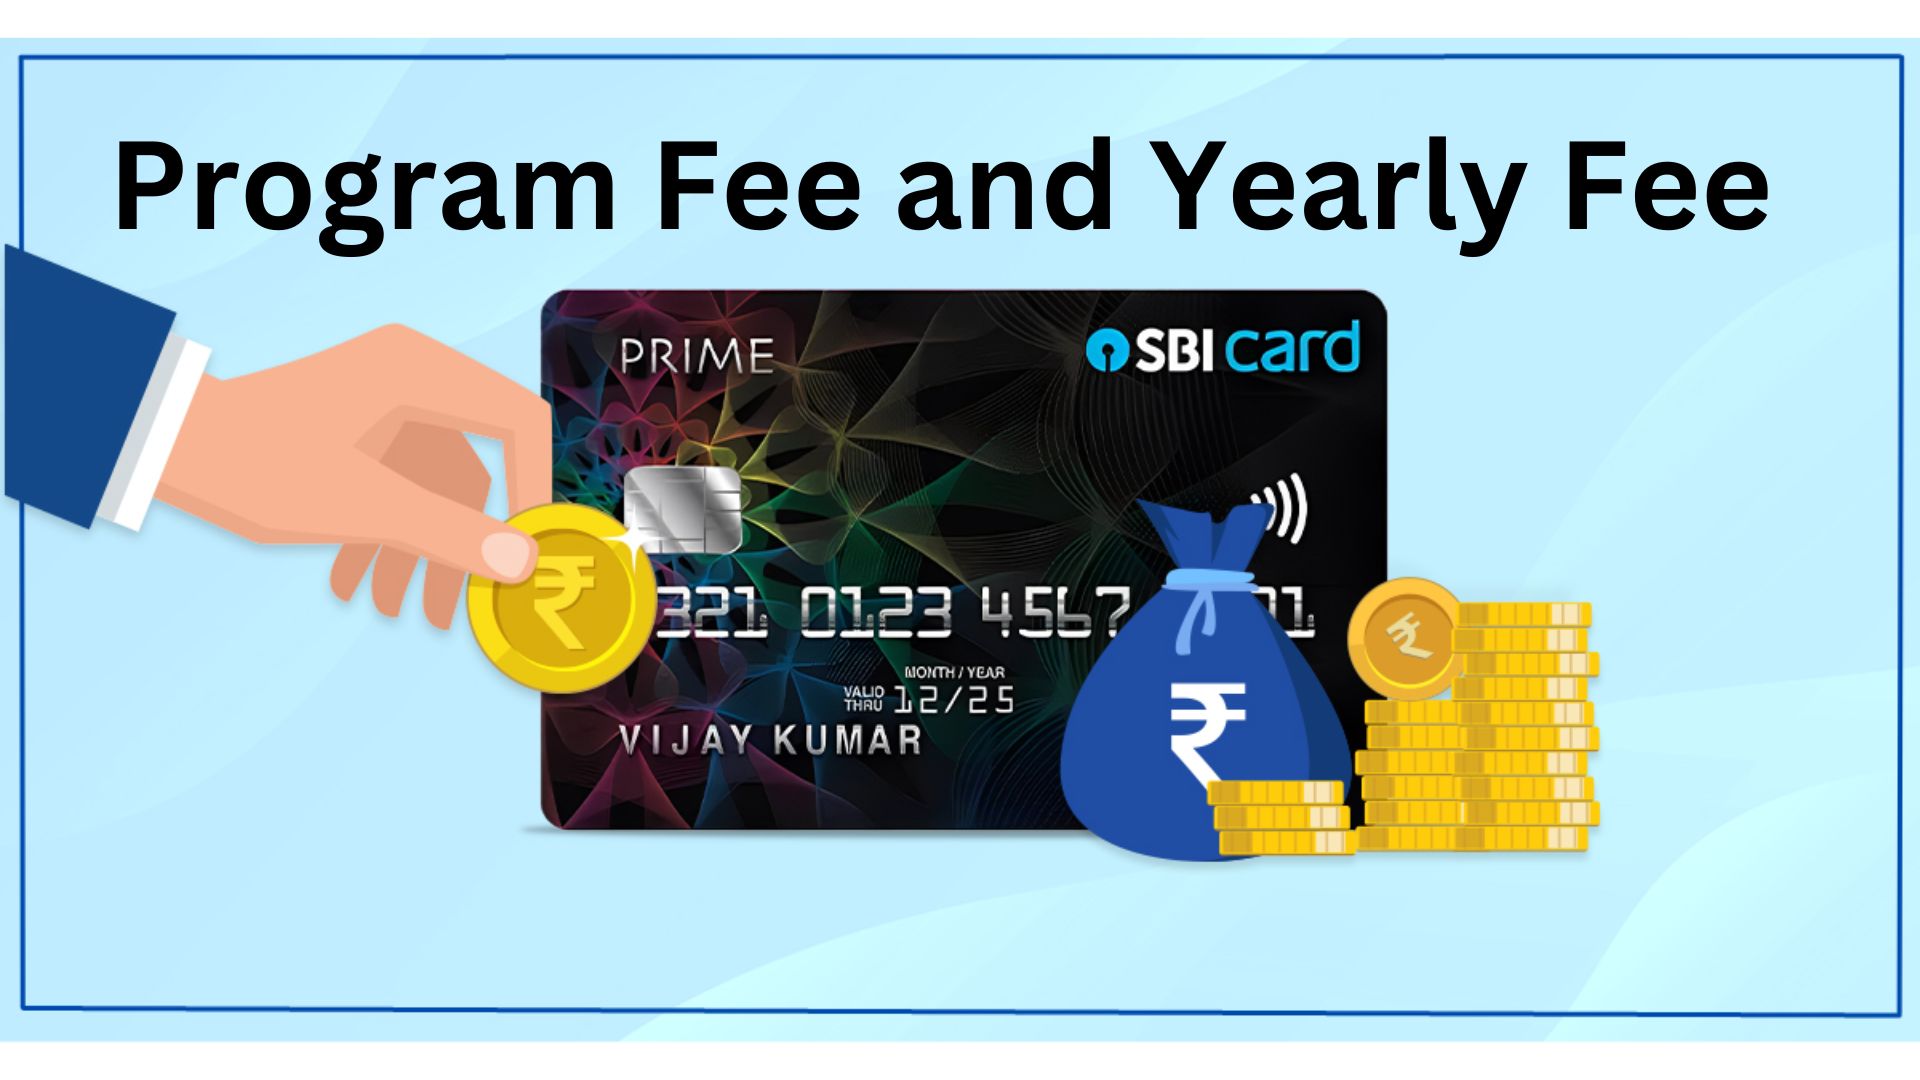 Program Fee and Yearly Fee